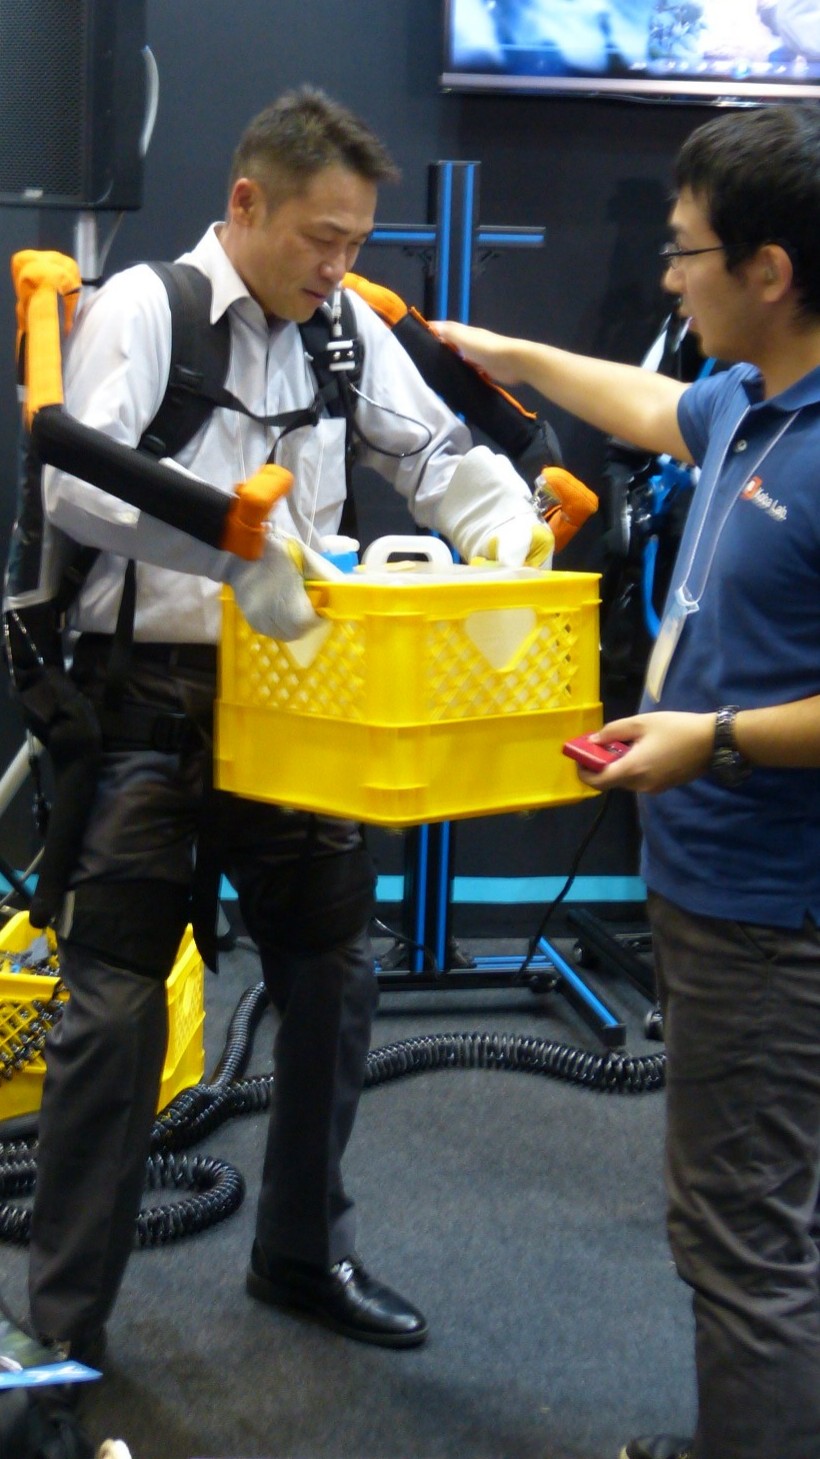 a man lifts a yellow plastic bin with assistance from an exoskeleton worn like a backpack